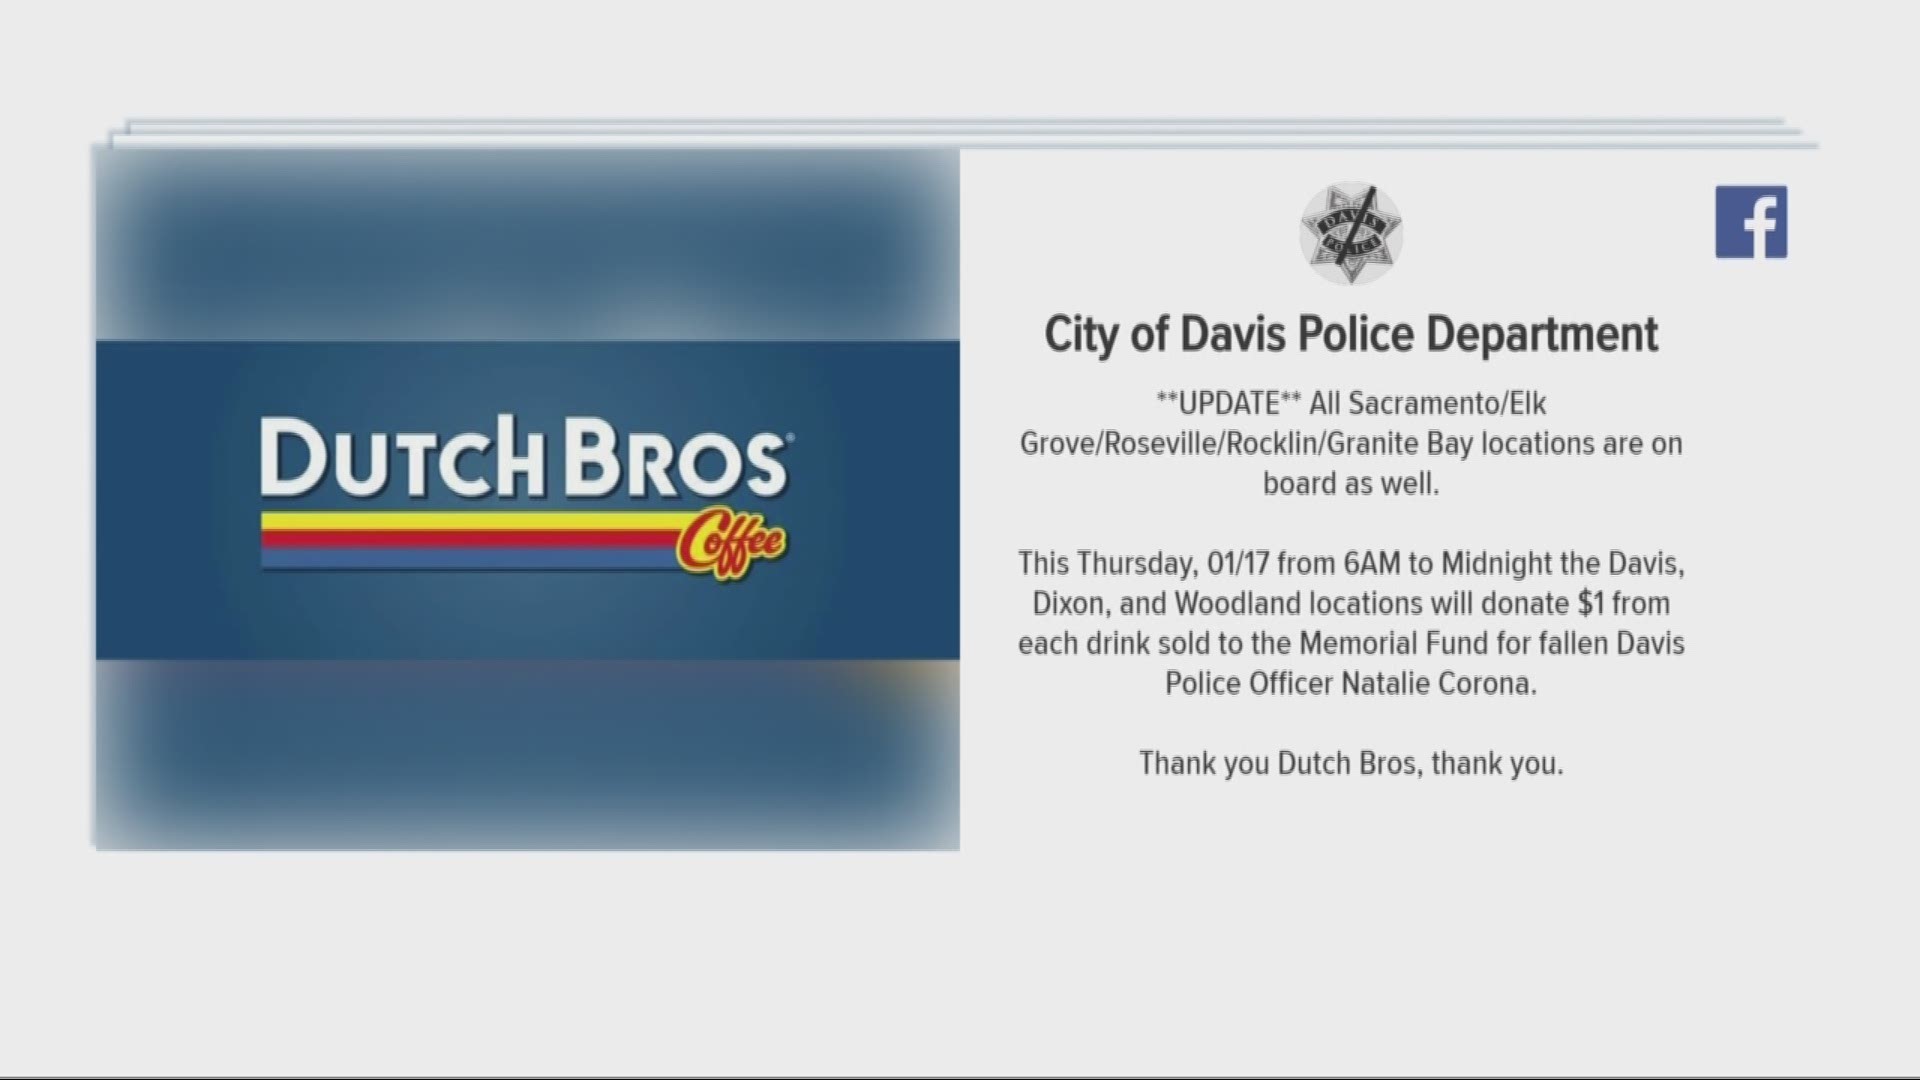 Dutch Bros is holding fundraiser at several locations for fallen Davis officer Natalie Corona.